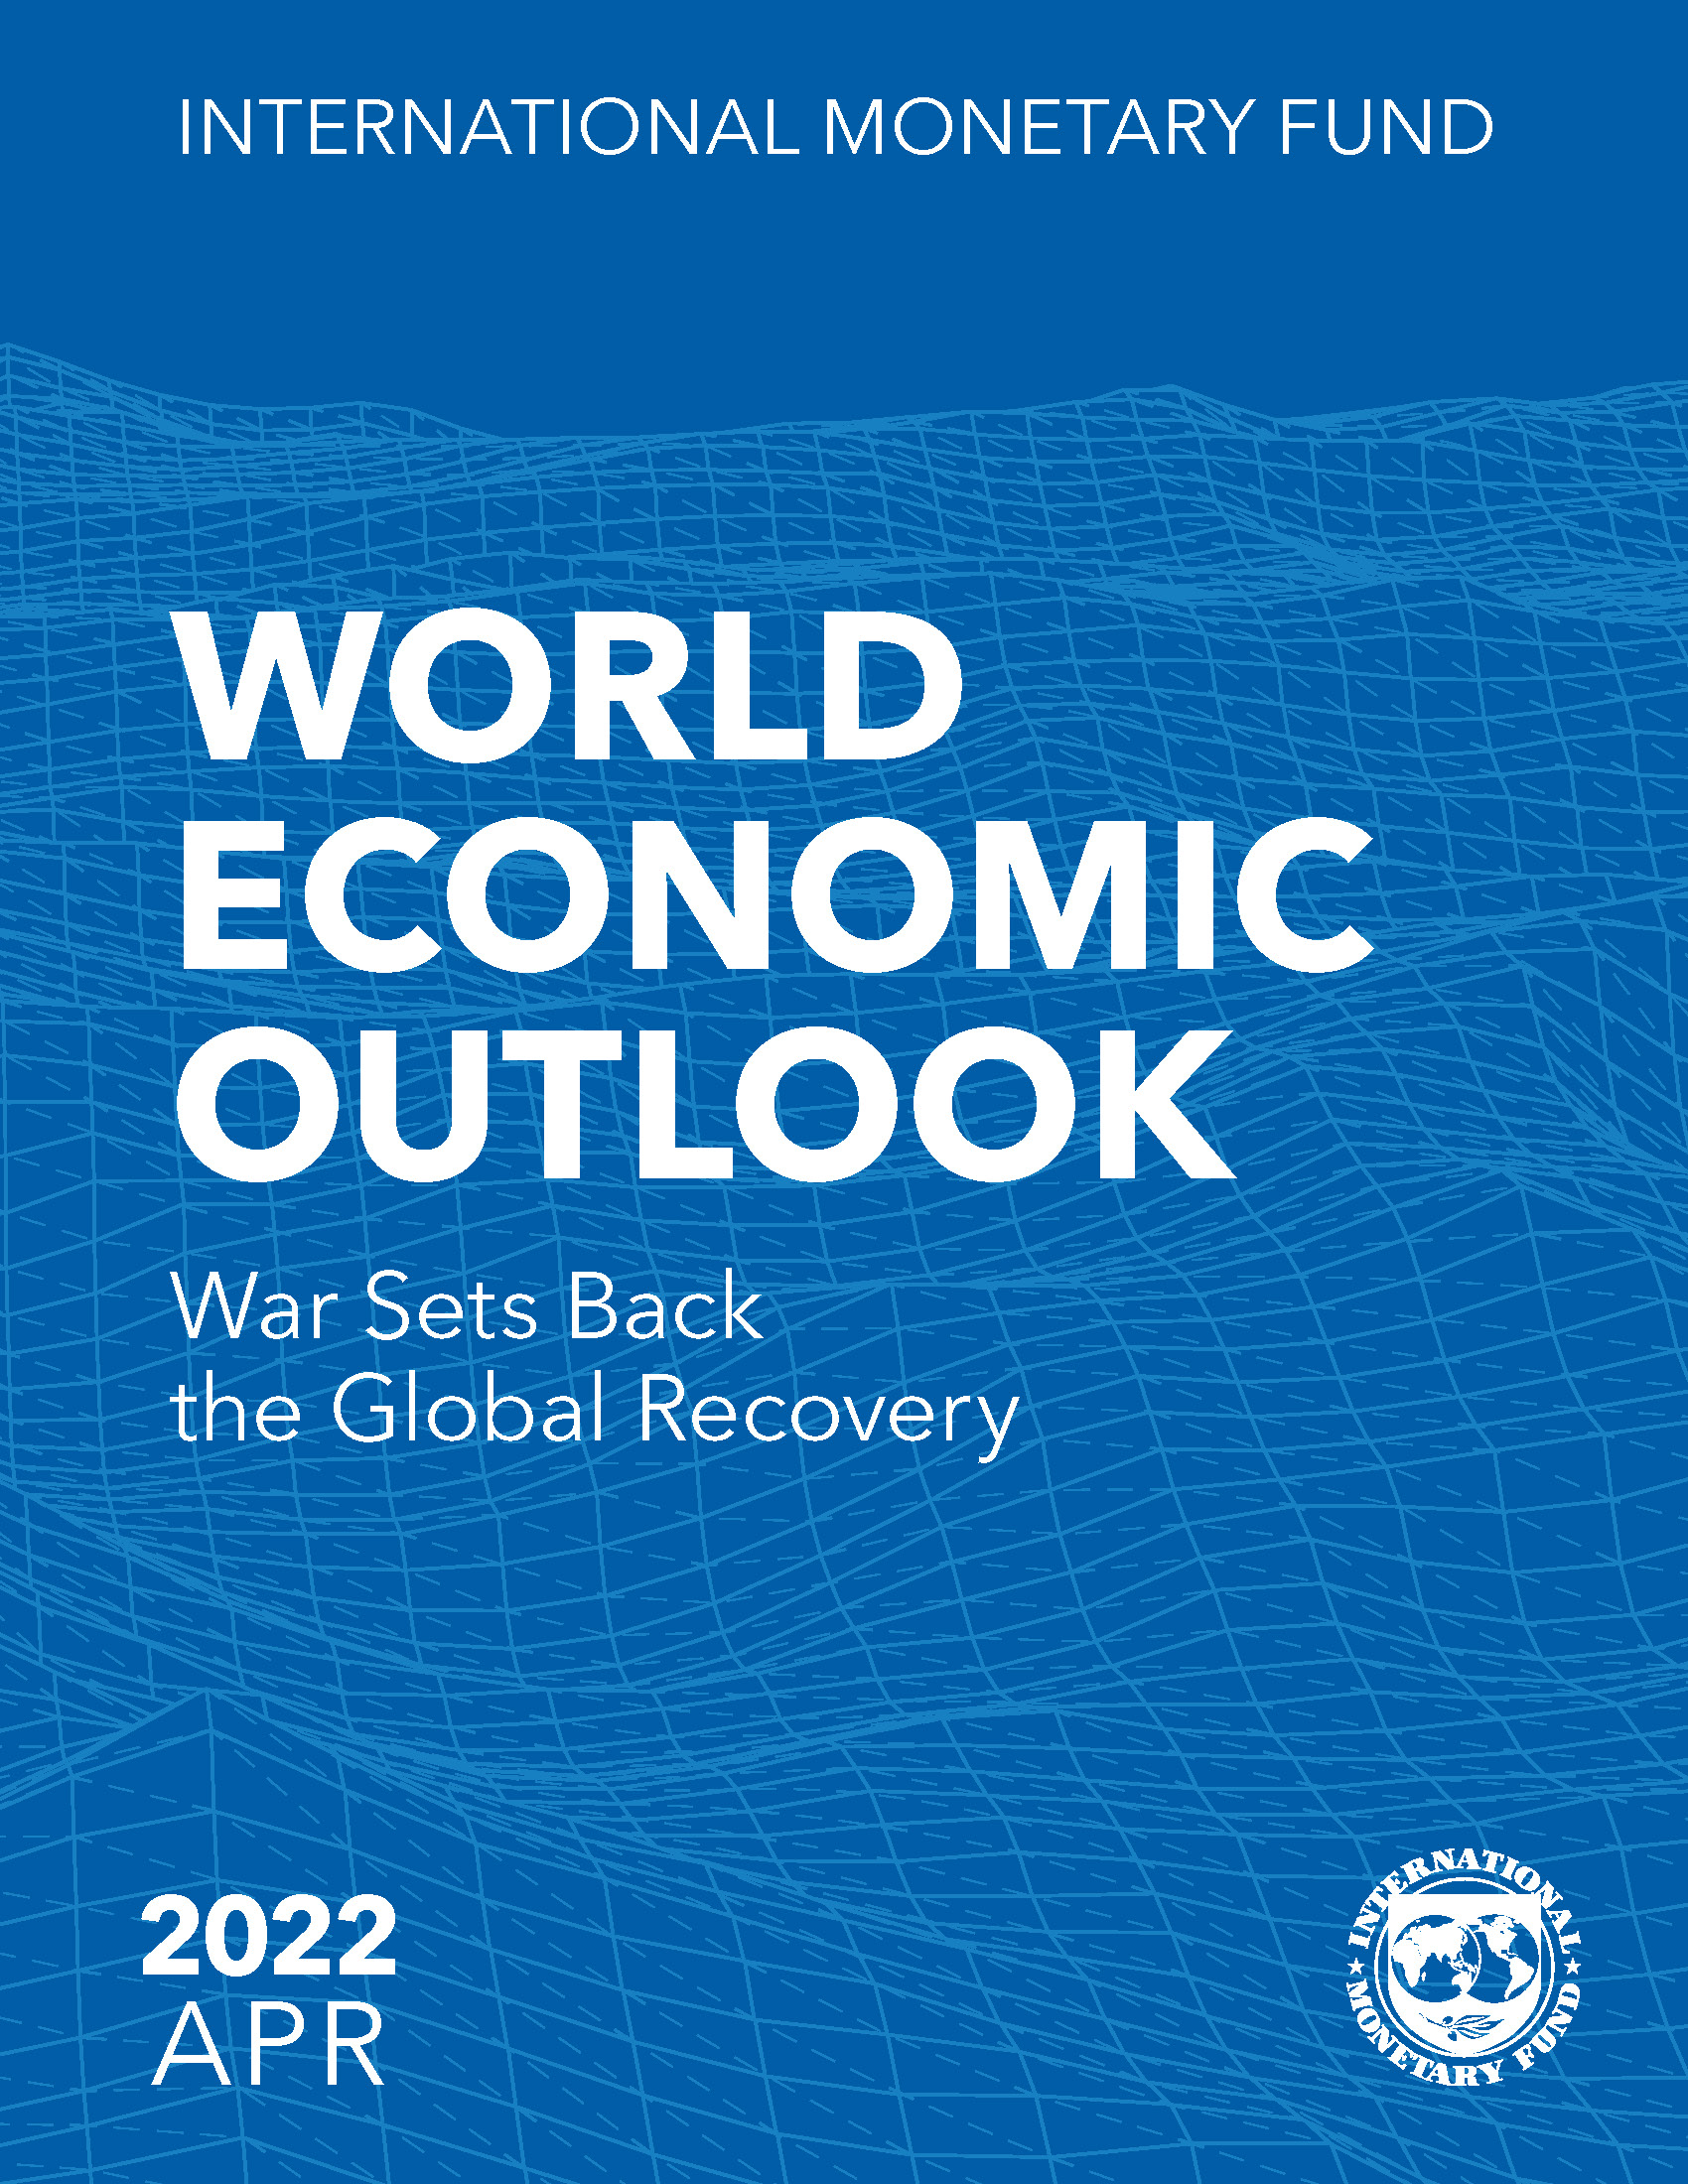 World Economic Outlook April 2022 – War slows recovery